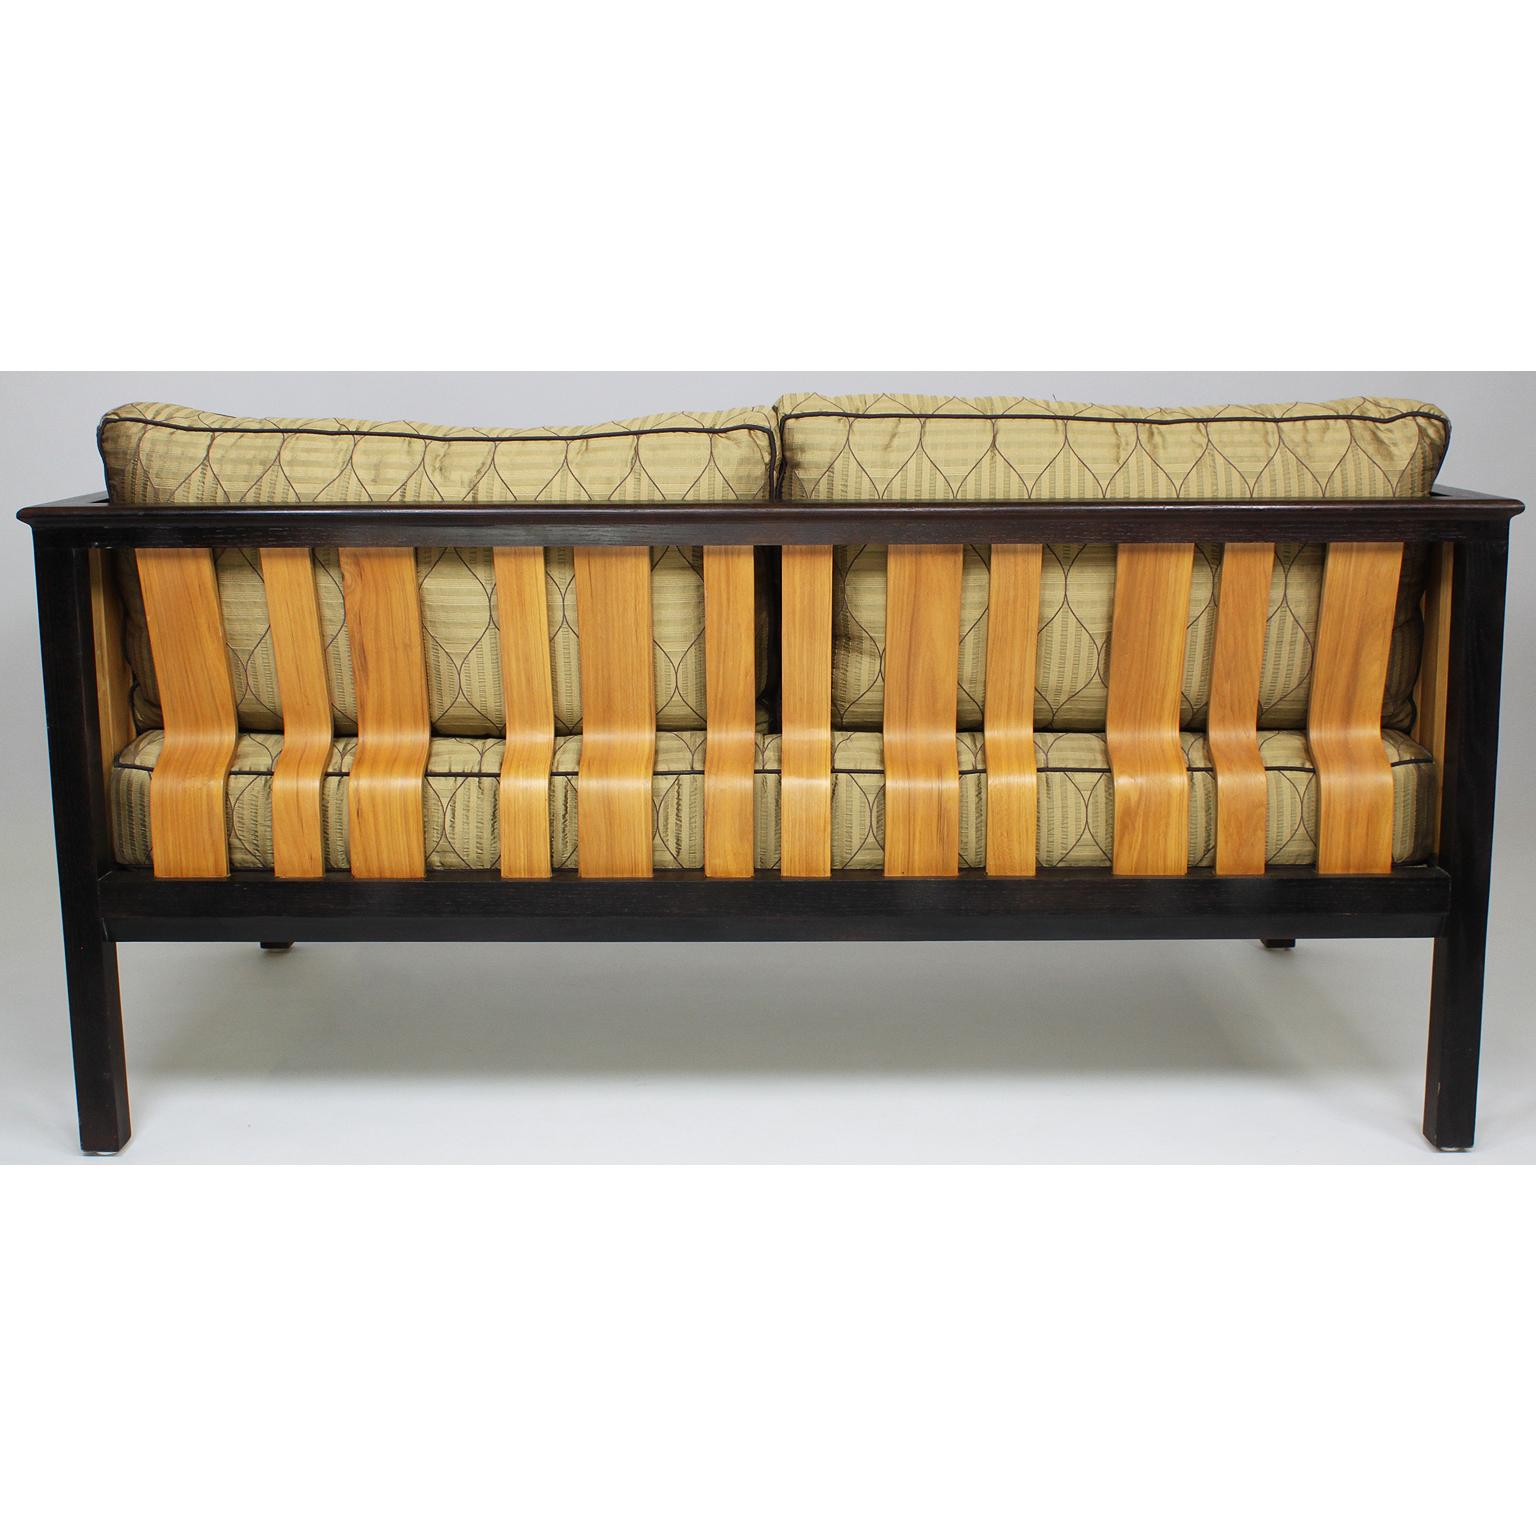 Mahogany and Ash Loveseat, Settee after a Design by Edward Wormley for Dunbar For Sale 1